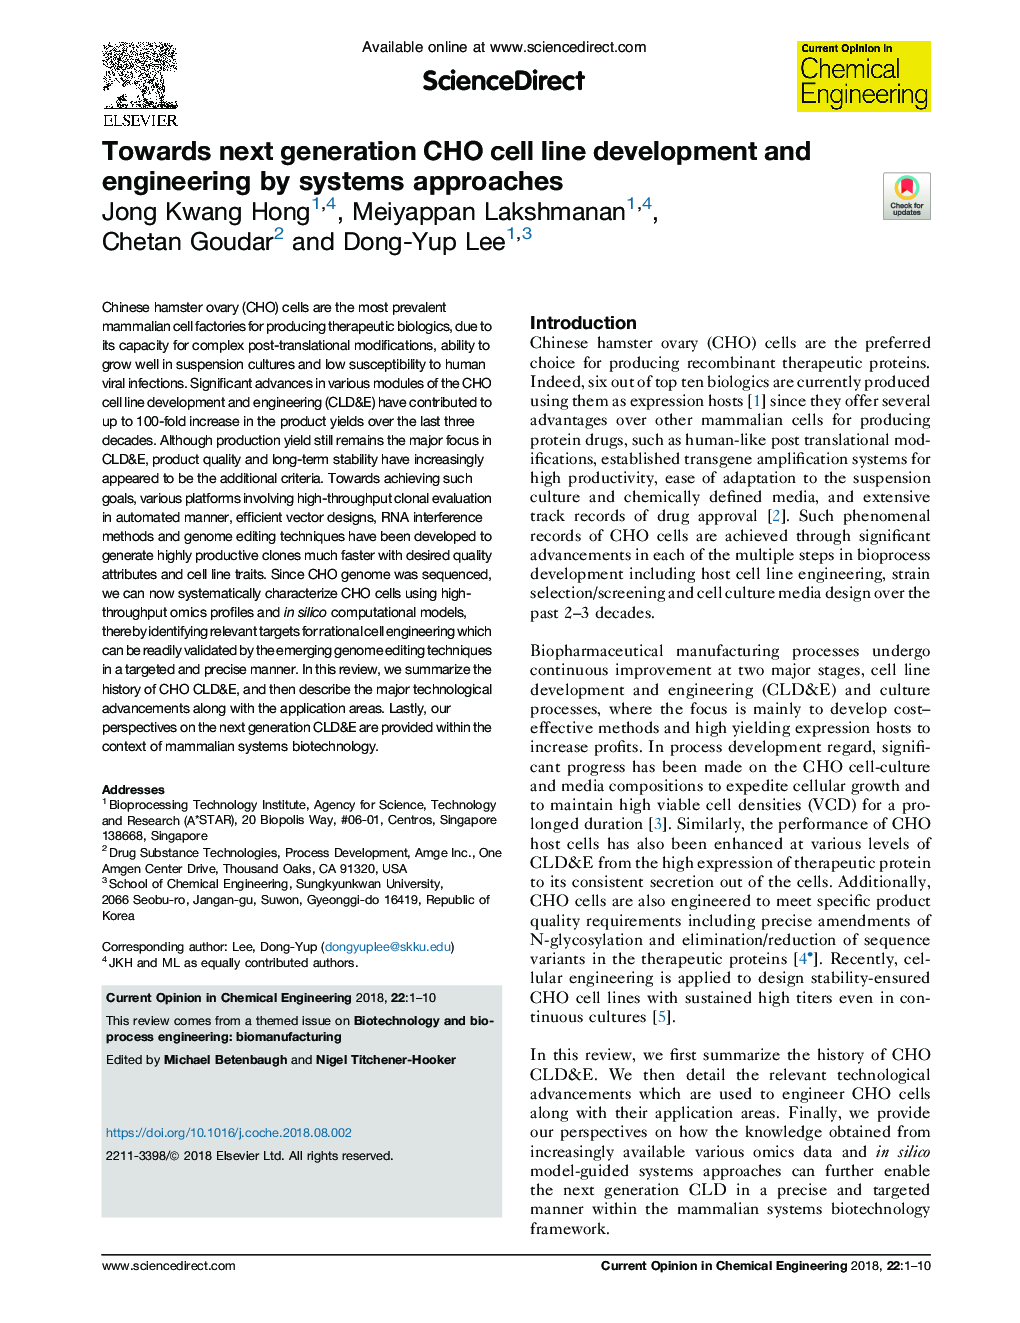 Towards next generation CHO cell line development and engineering by systems approaches